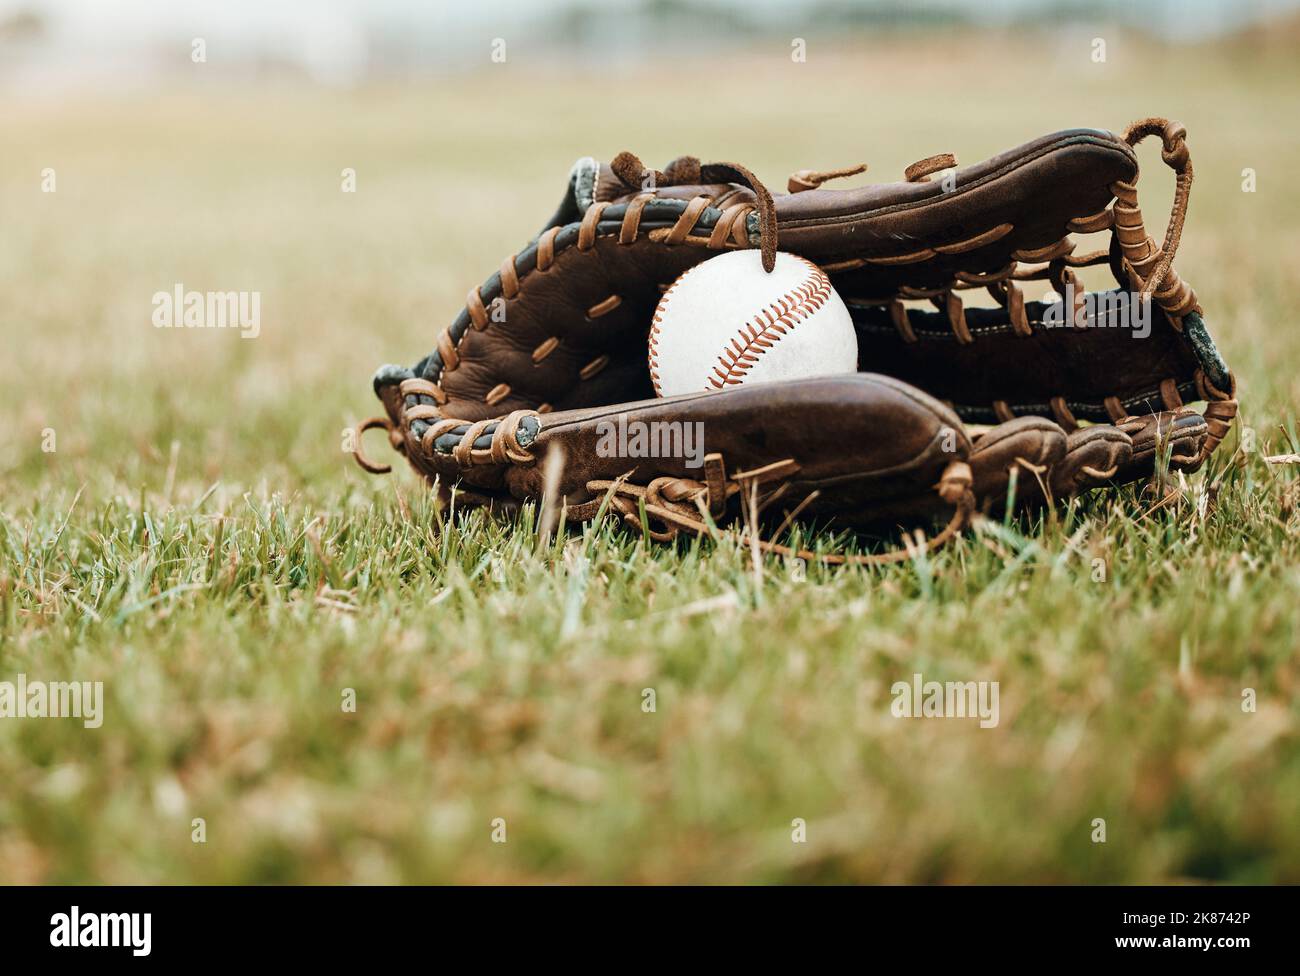 Baseball, sport and ball with glove on a grass pitch or field outdoor for a competitive game or match. Fitness, sports gear and skill with equipment Stock Photo